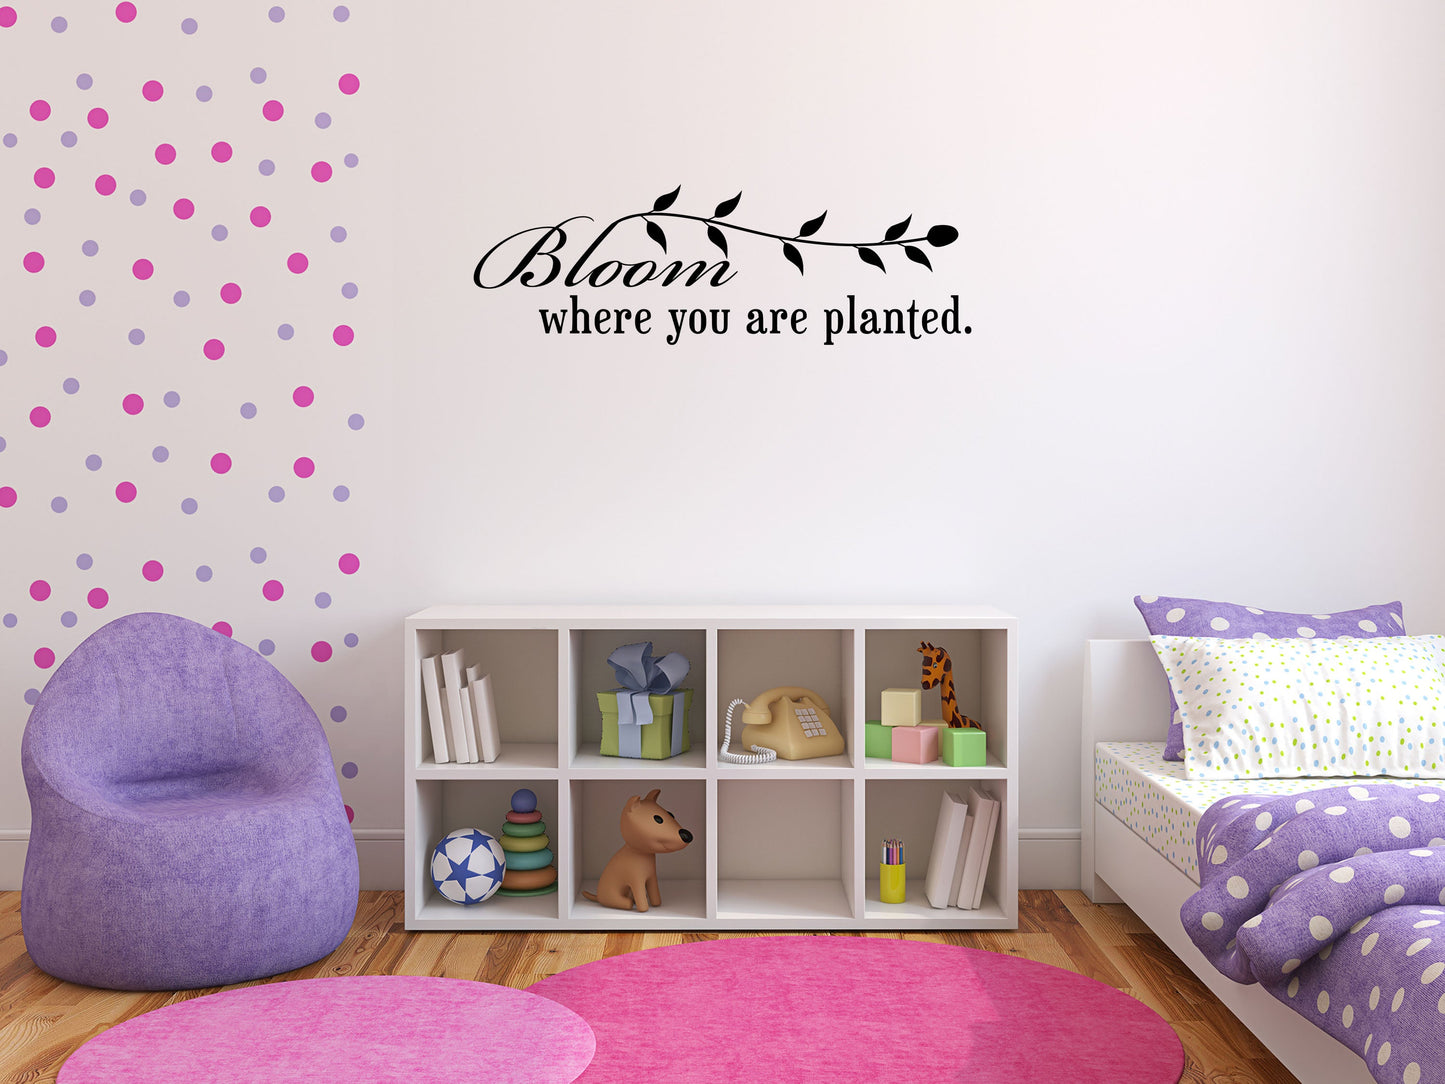 Bloom Where You Are Planted Wall Stickers - Inspirational Wall Decals Vinyl Wall Decal Inspirational Wall Signs 